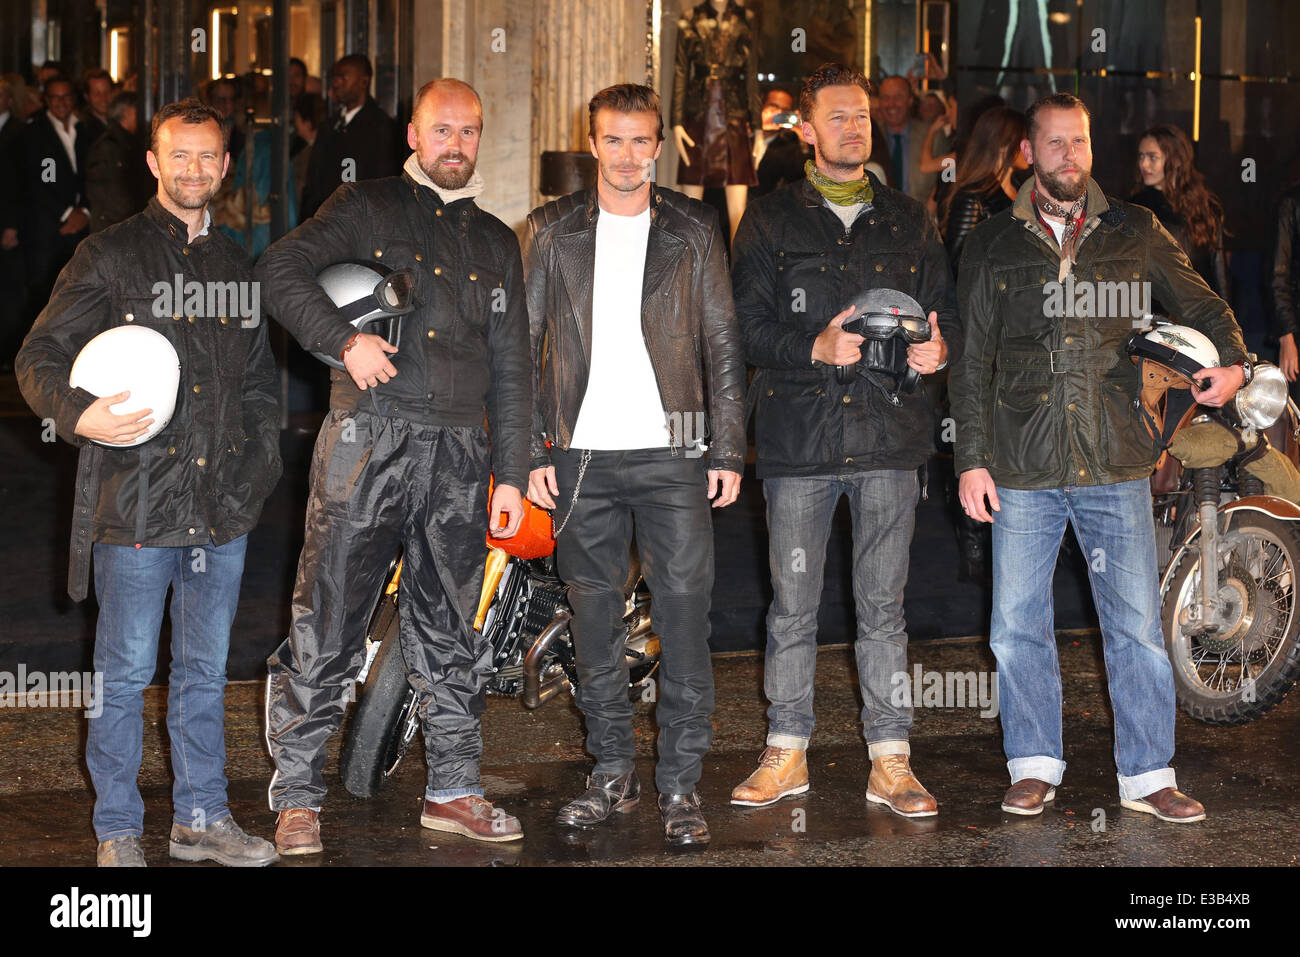 Belstaff Clothing High Resolution Stock Photography and Images - Alamy